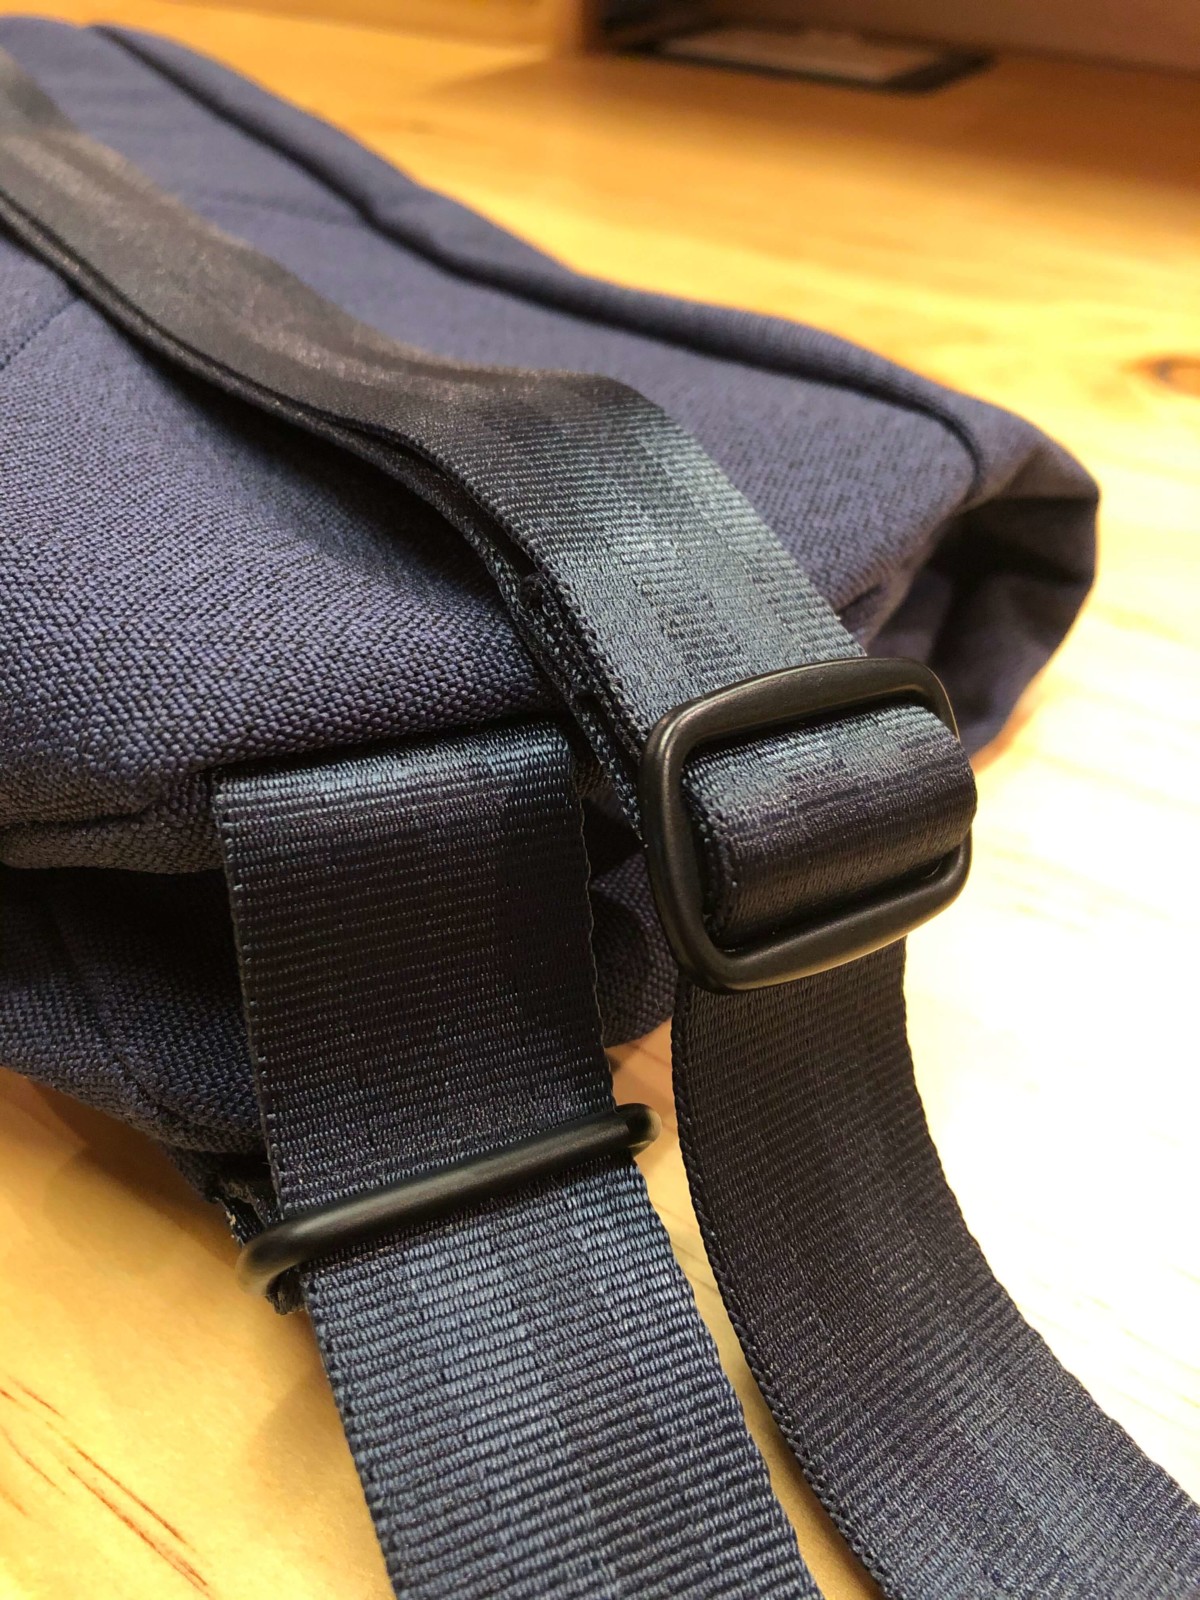 Buckles of the Bellroy Sling